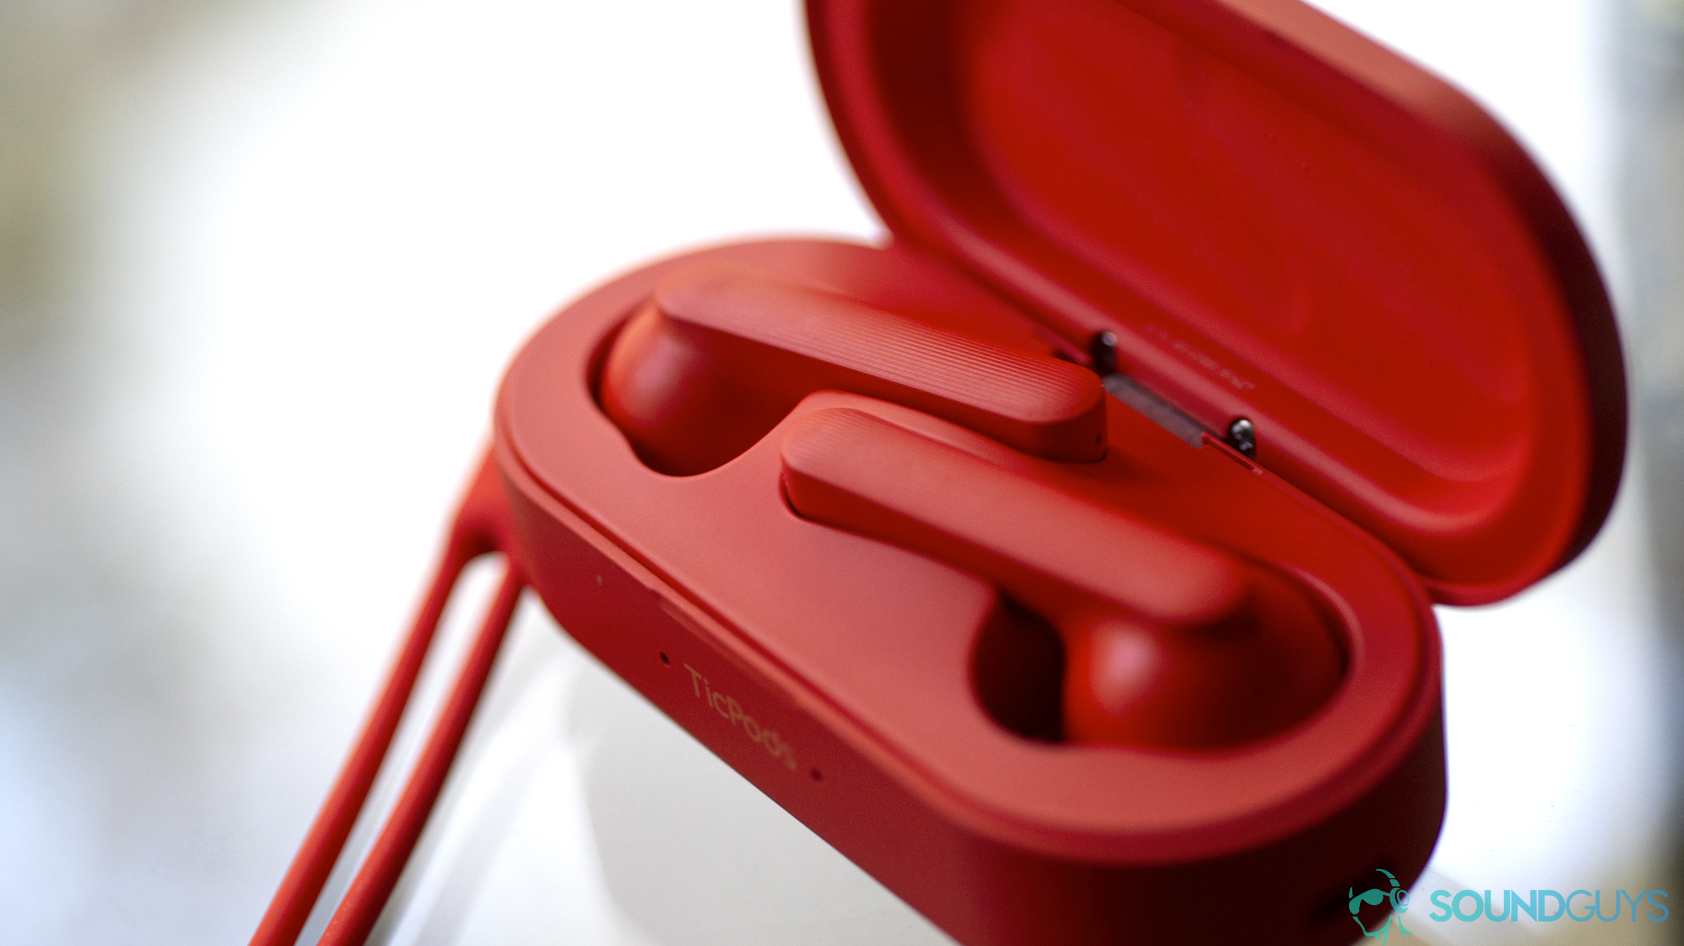 Mobvoi TicPods Free in red inside of its charging case against a white backdrop.